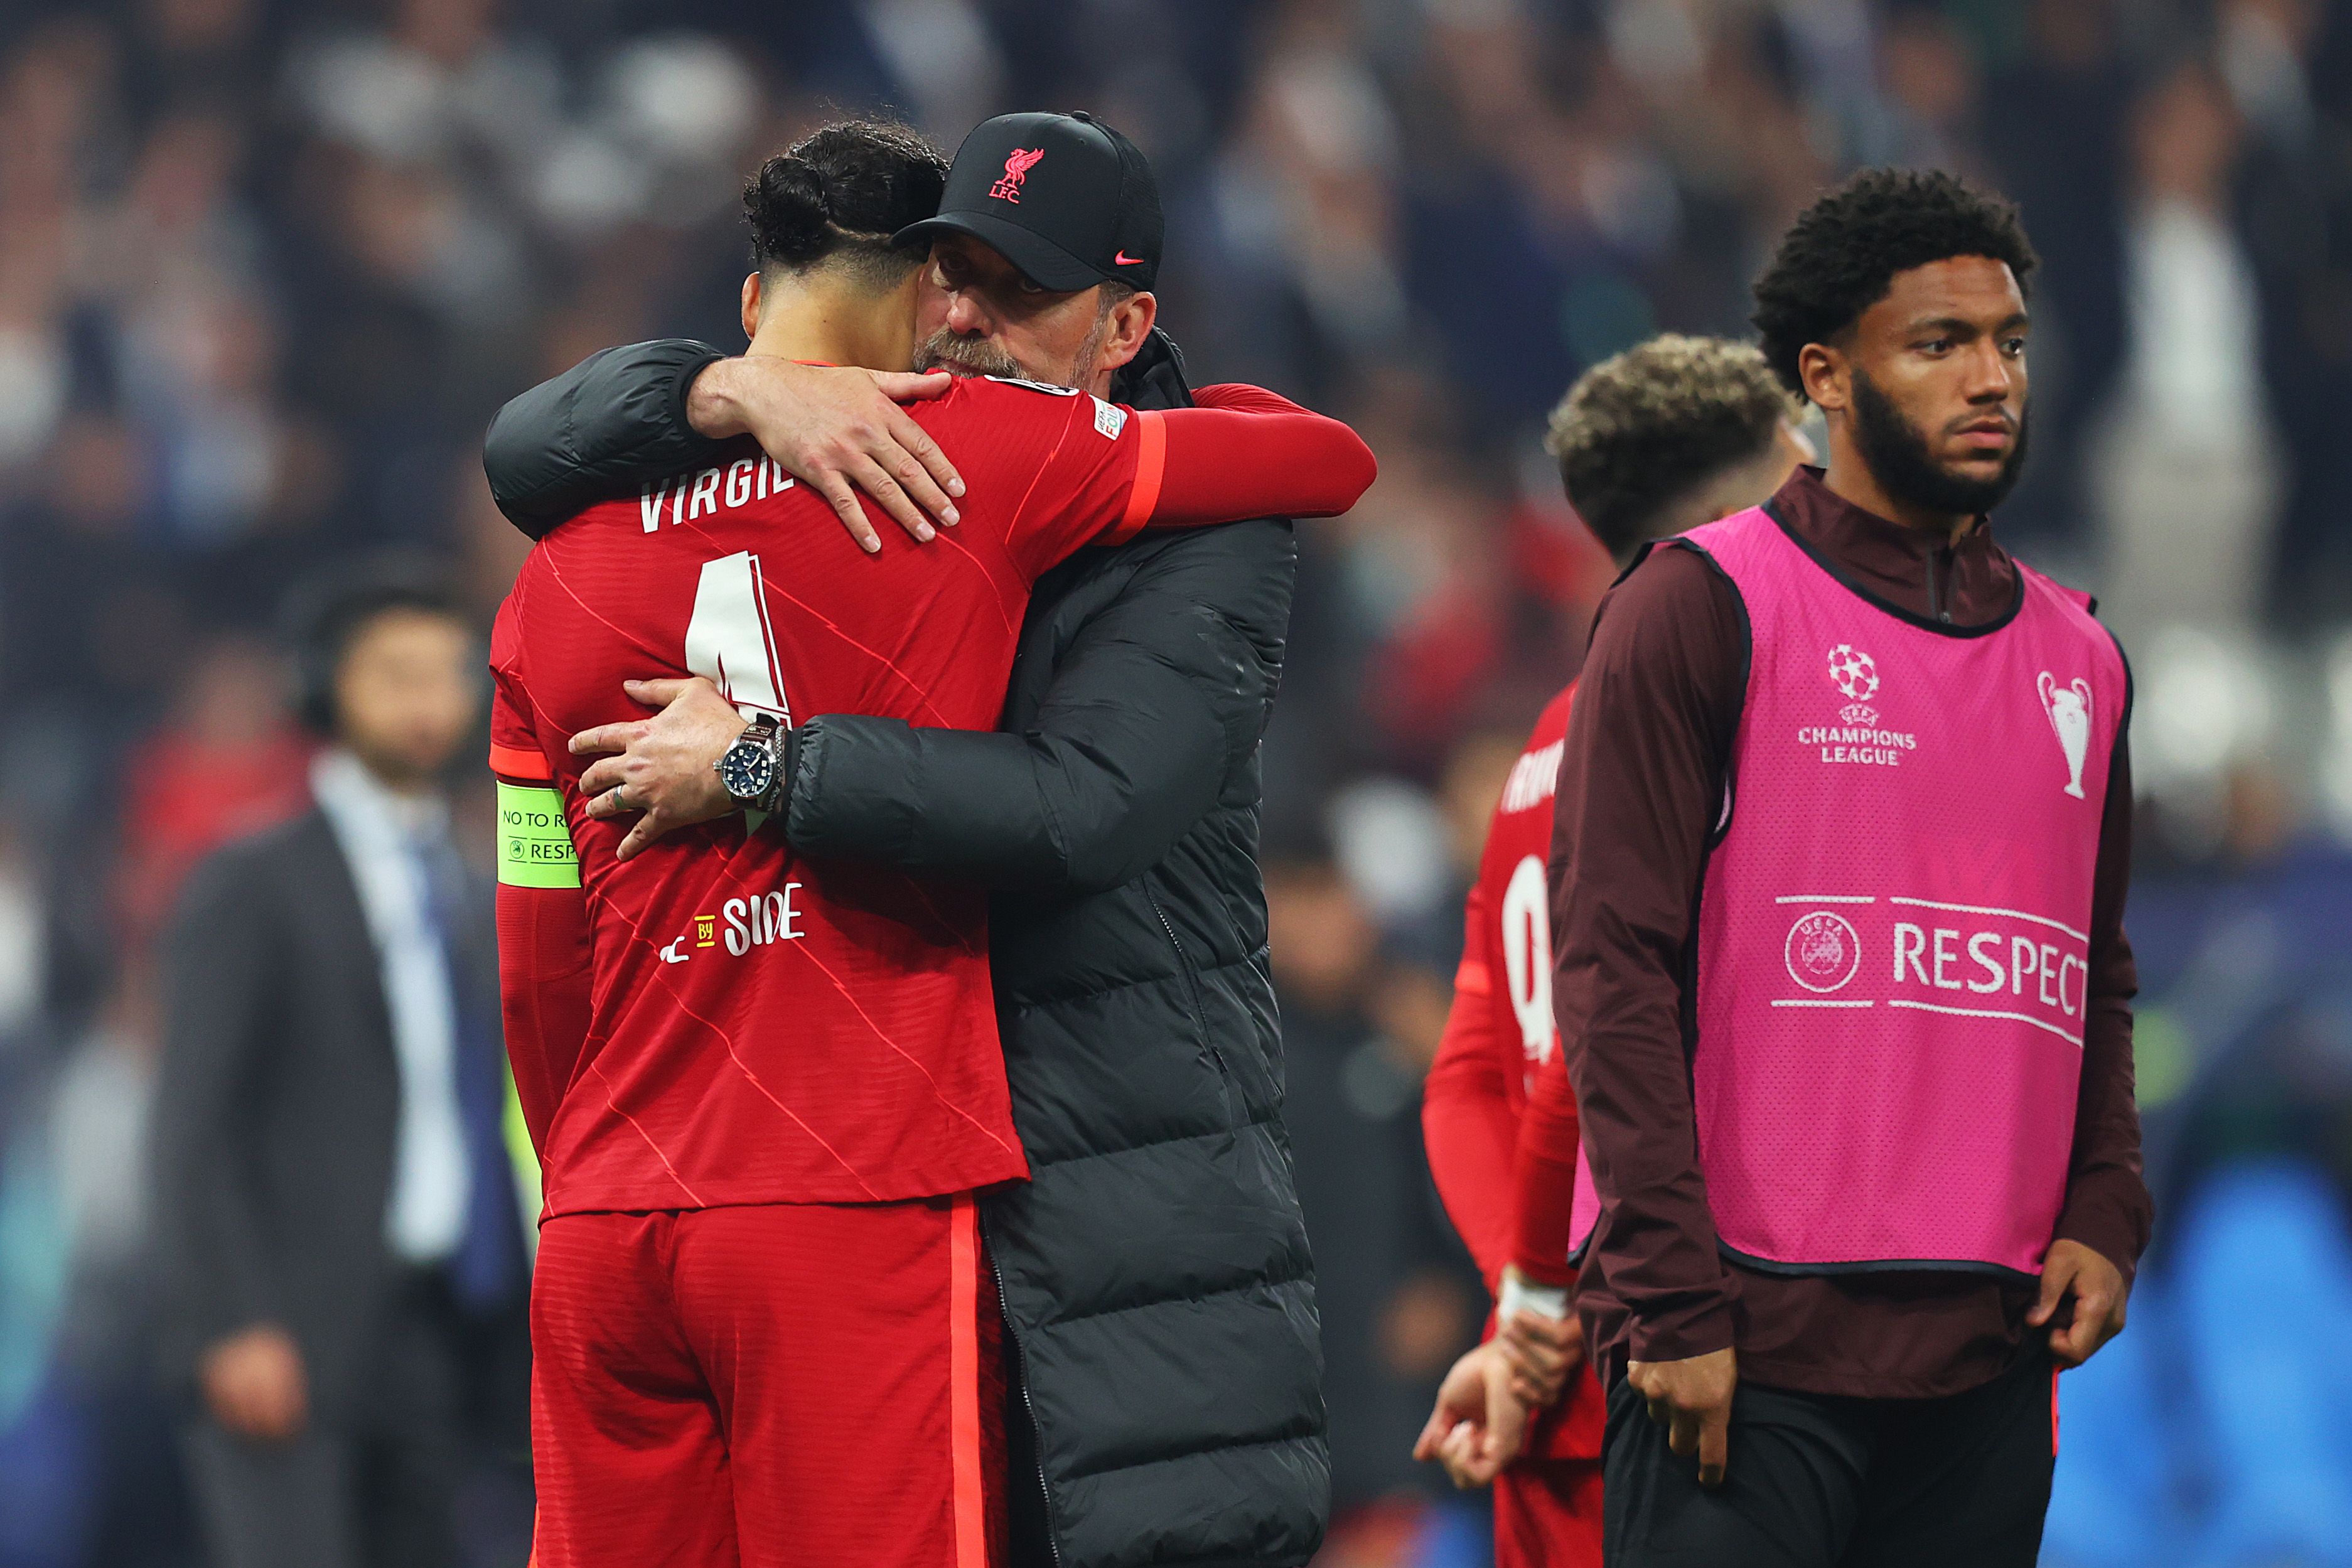 Liverpool lose Champions League final to Real Madrid